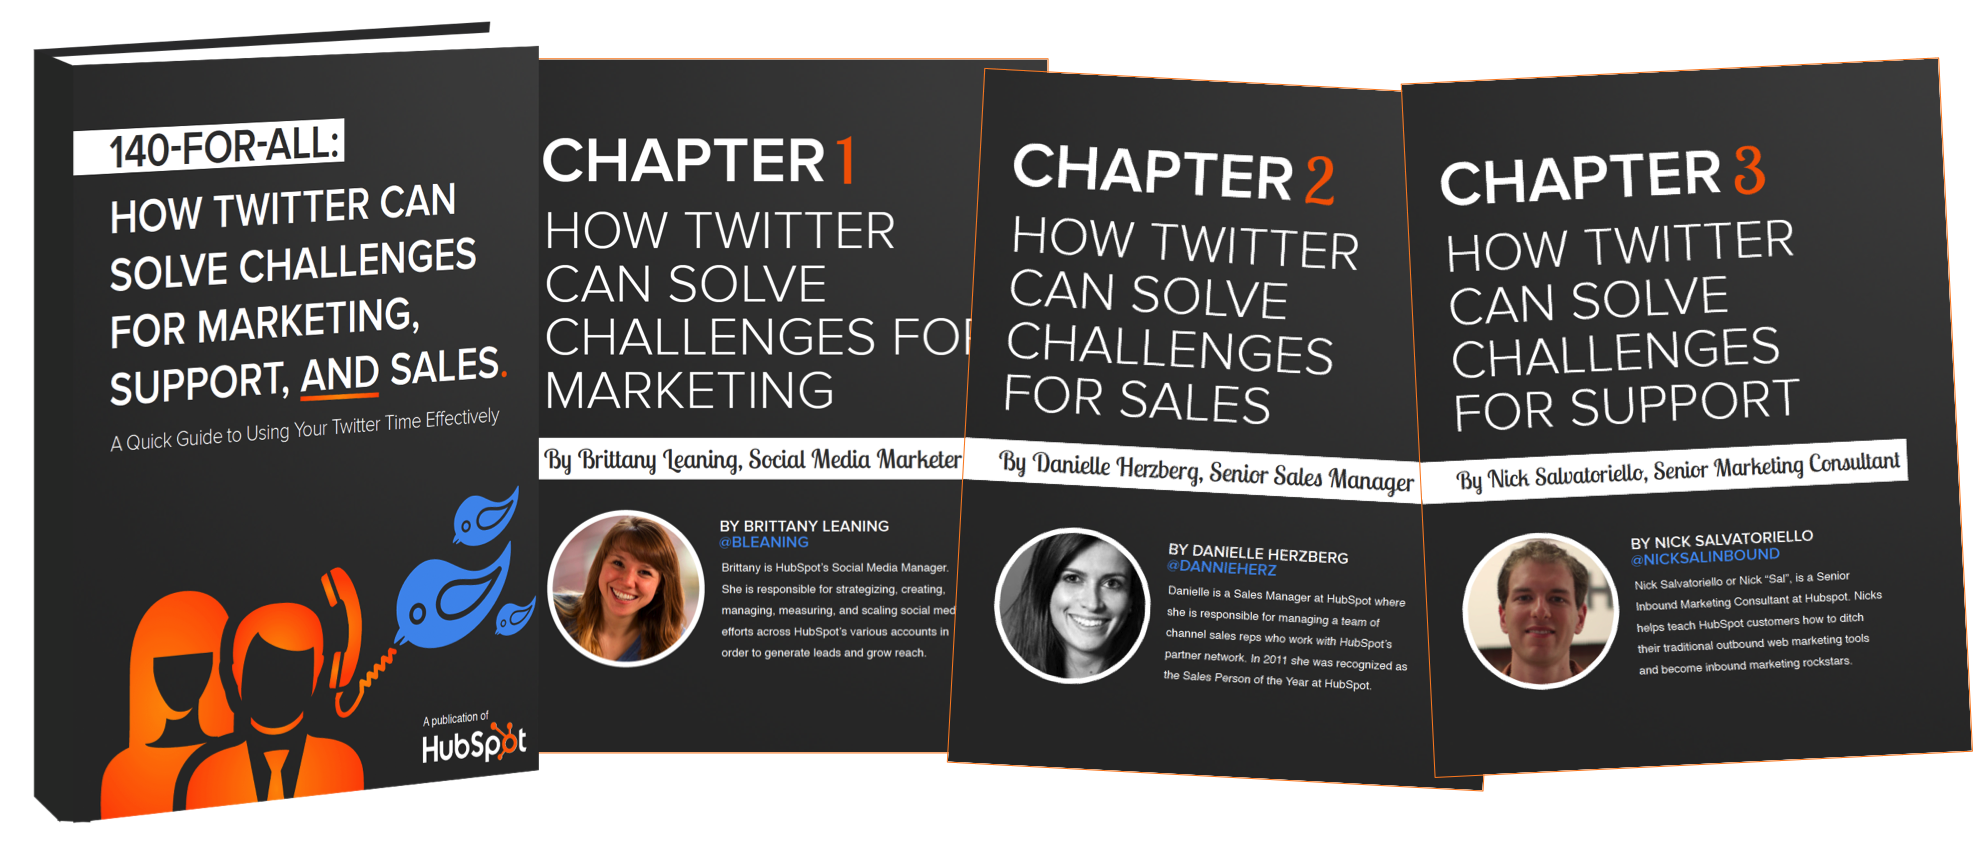 140-for-all-how-twitter-can-solve-challenges-for-marketing-support-and-sales